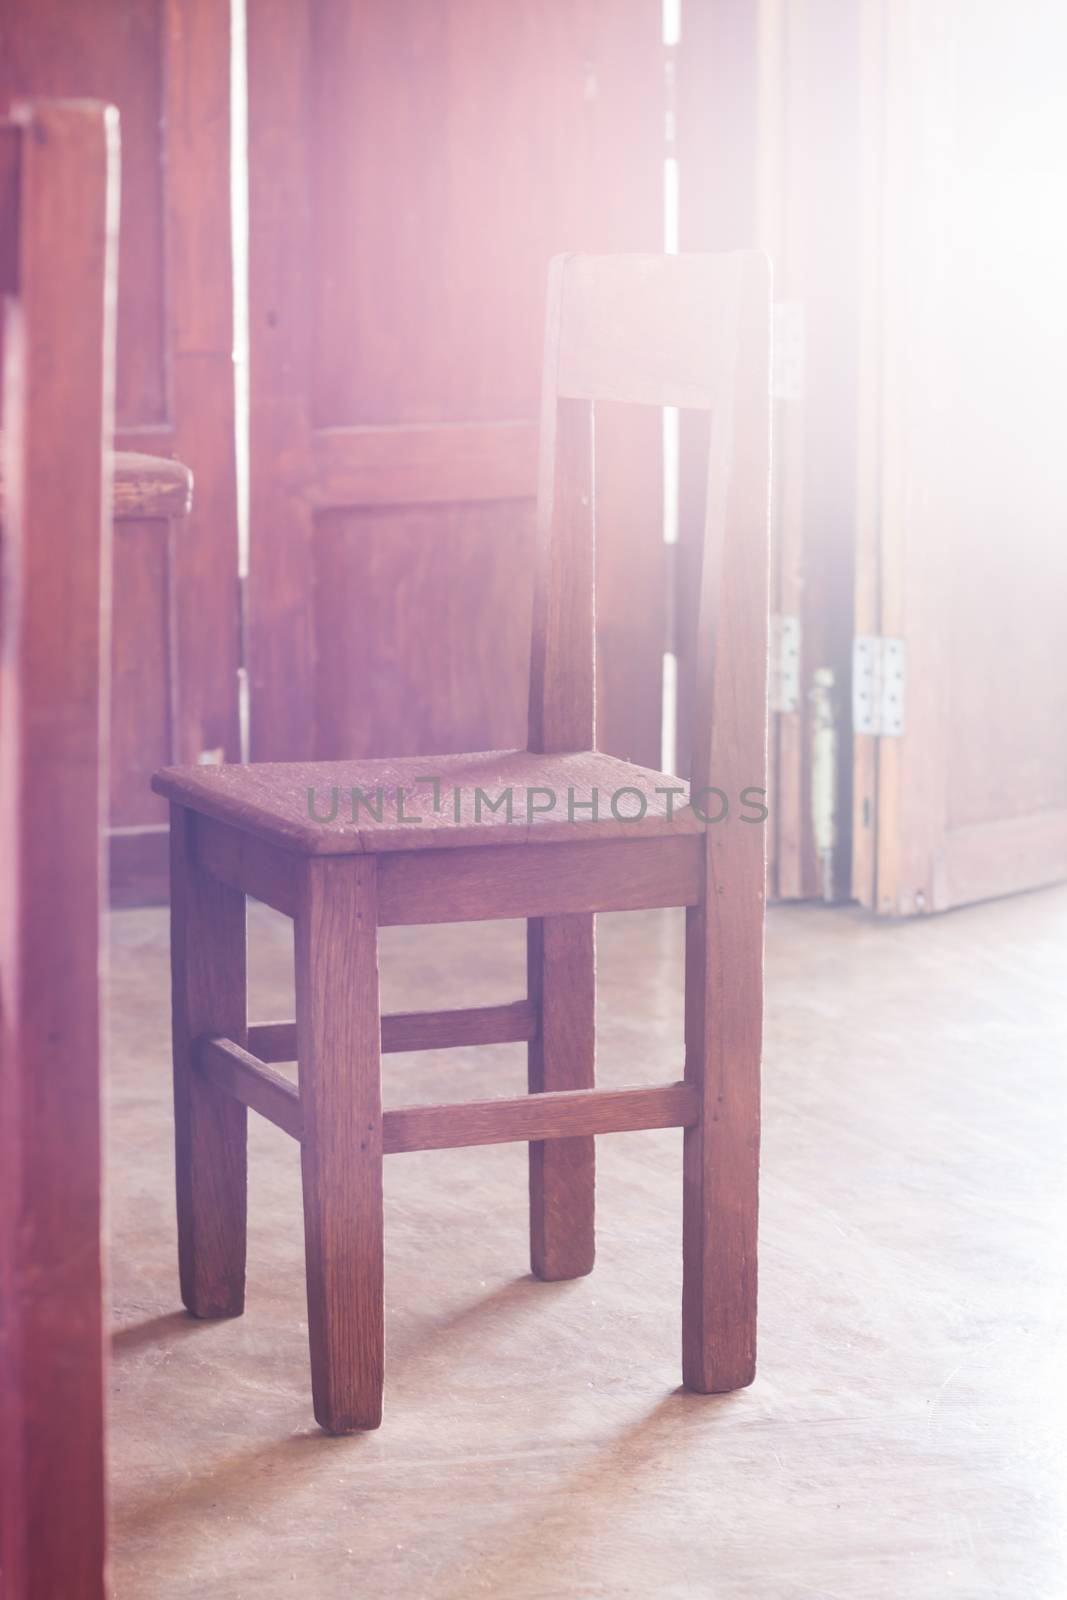 Old style wooden chair in coffee shop with vintage filter, stock photo